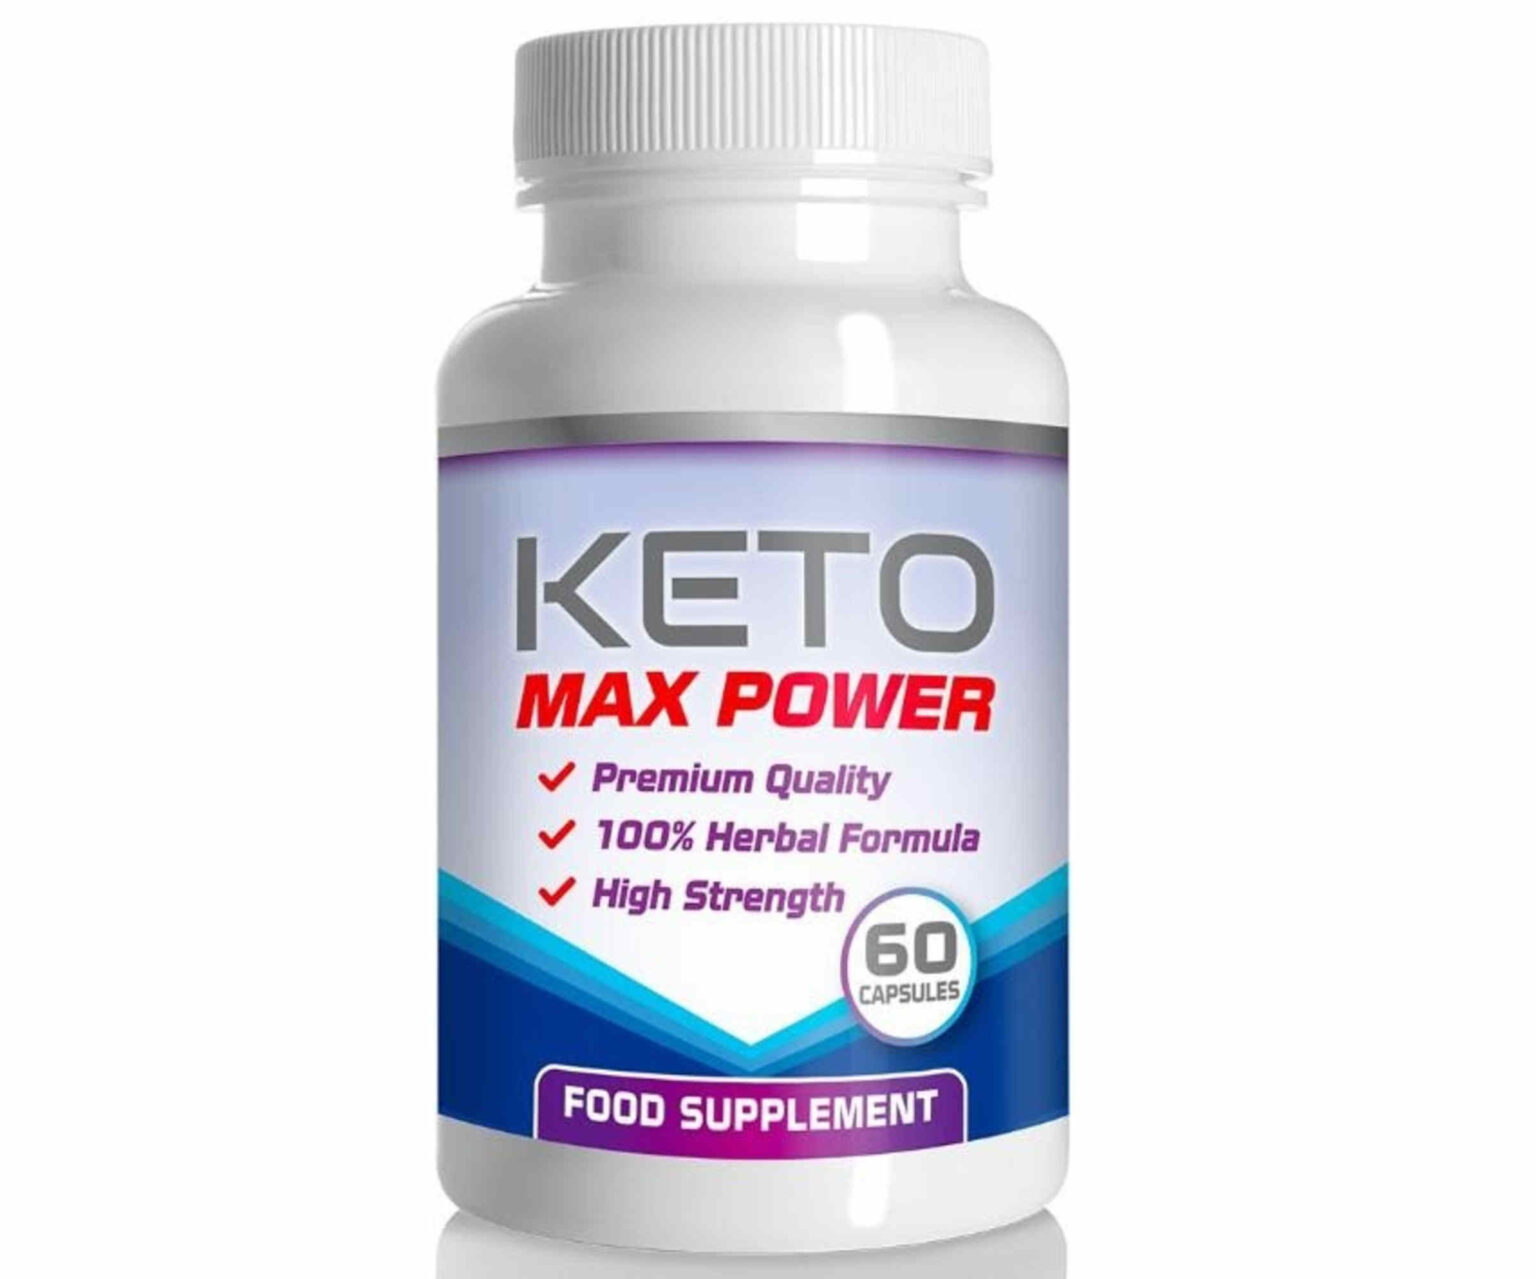 Do you need an extra boost to help get your body in shape? Grab a pen and take notes to ask your doctor if Keto Max Power is right for you!